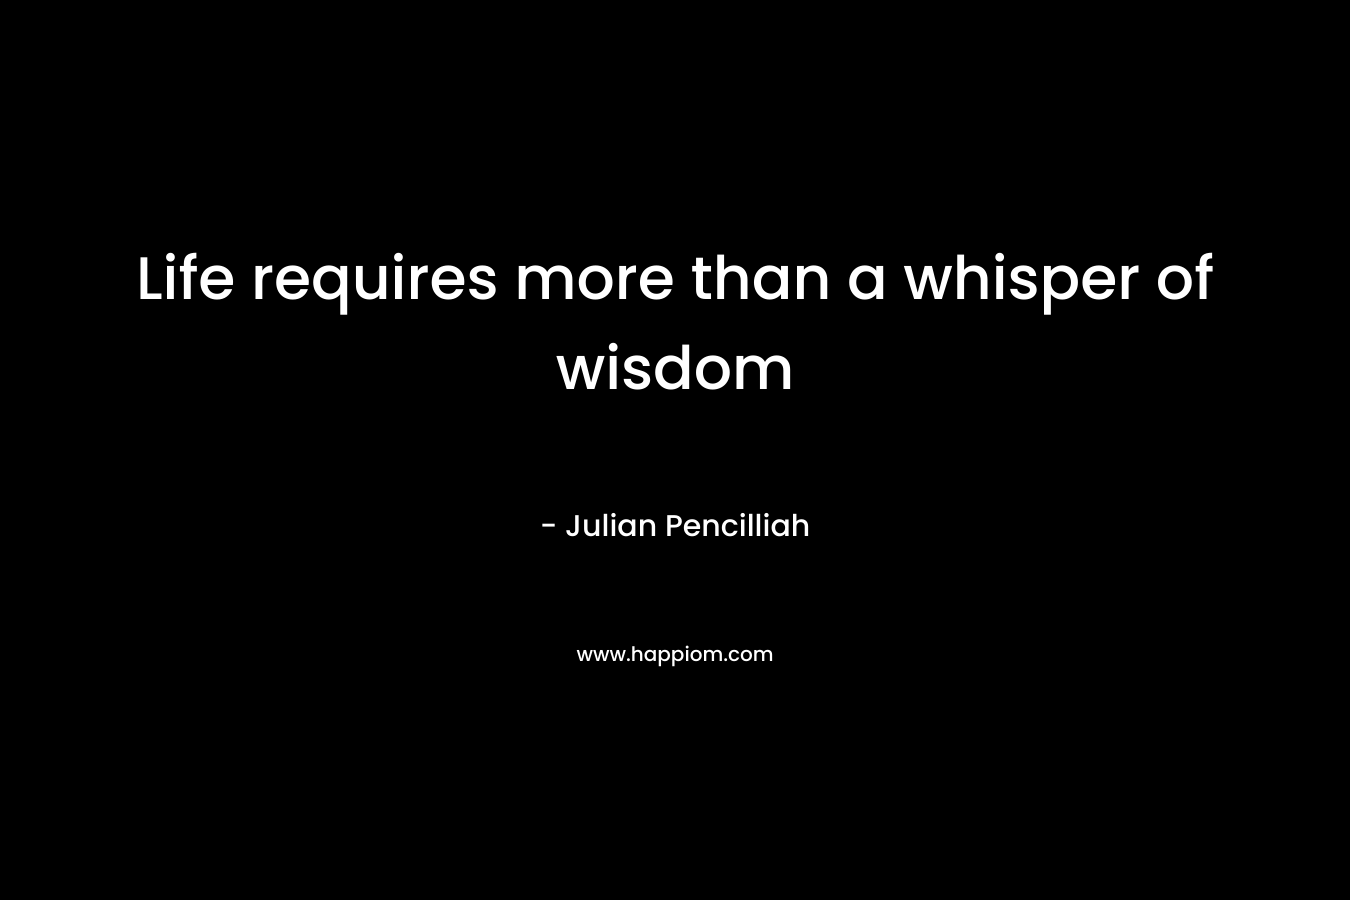 Life requires more than a whisper of wisdom